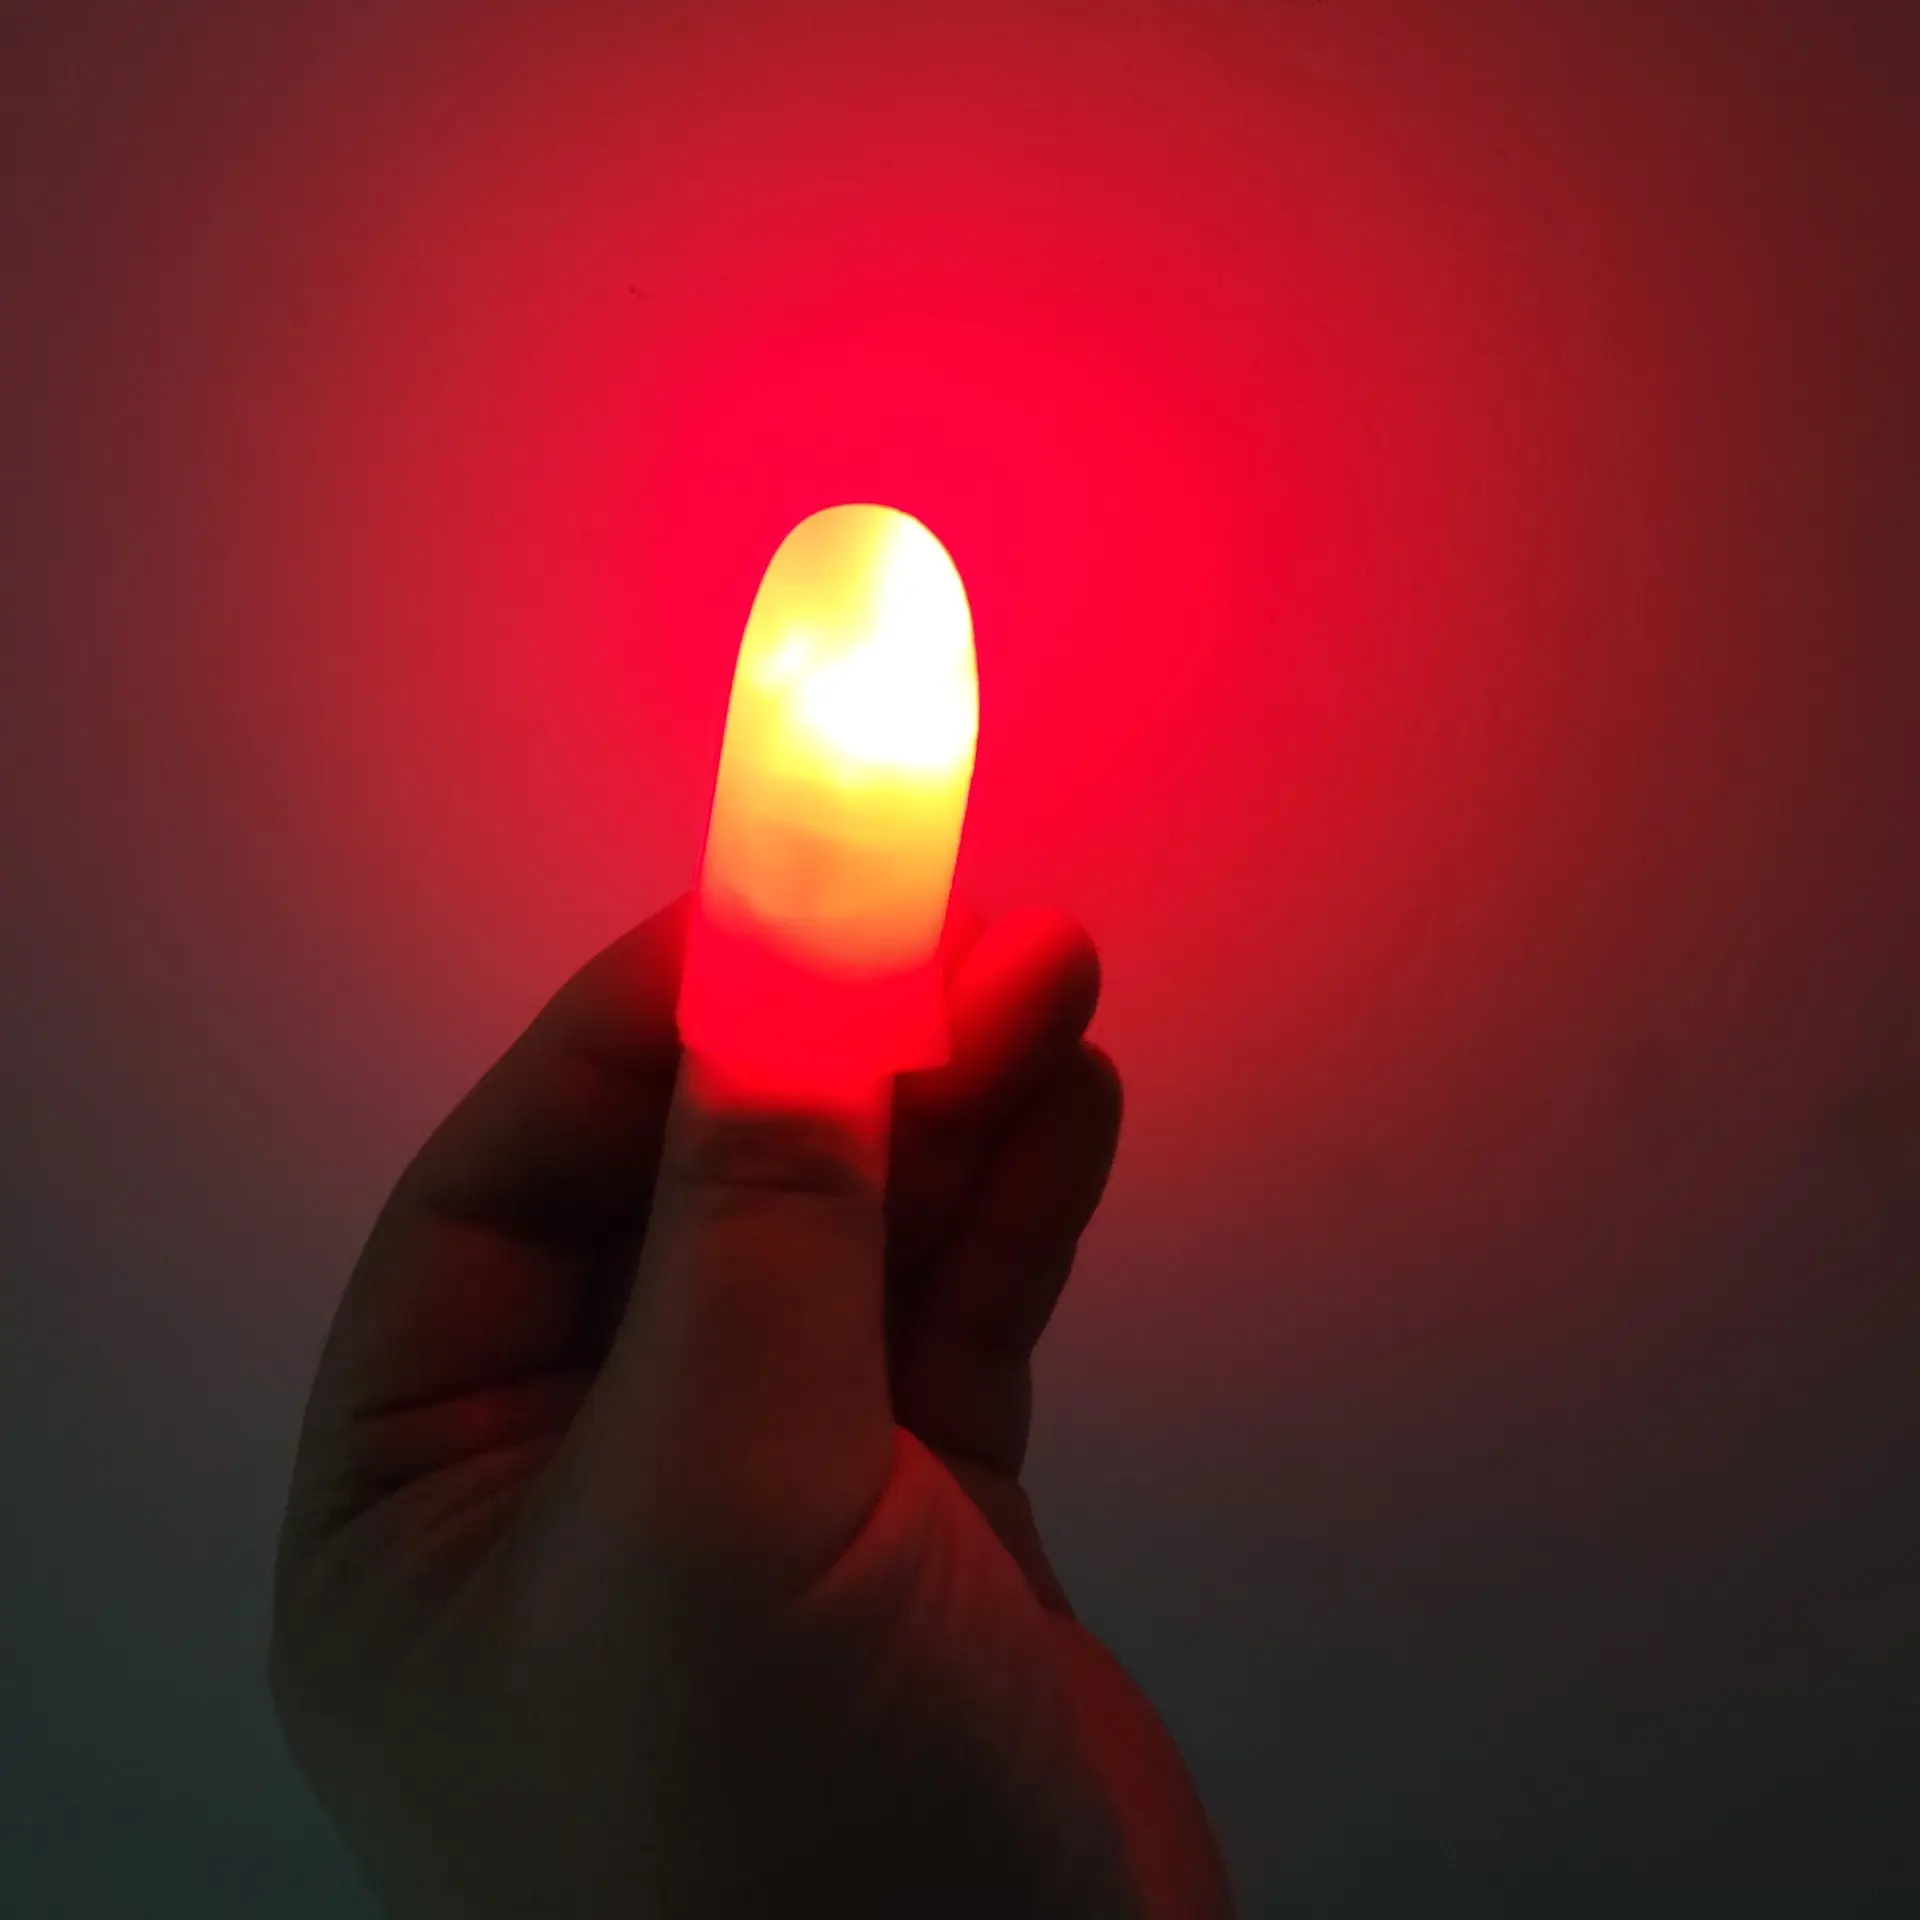 BrilliantMagic light from anywhere magic trick thumb tips for stage magic show and street magic show